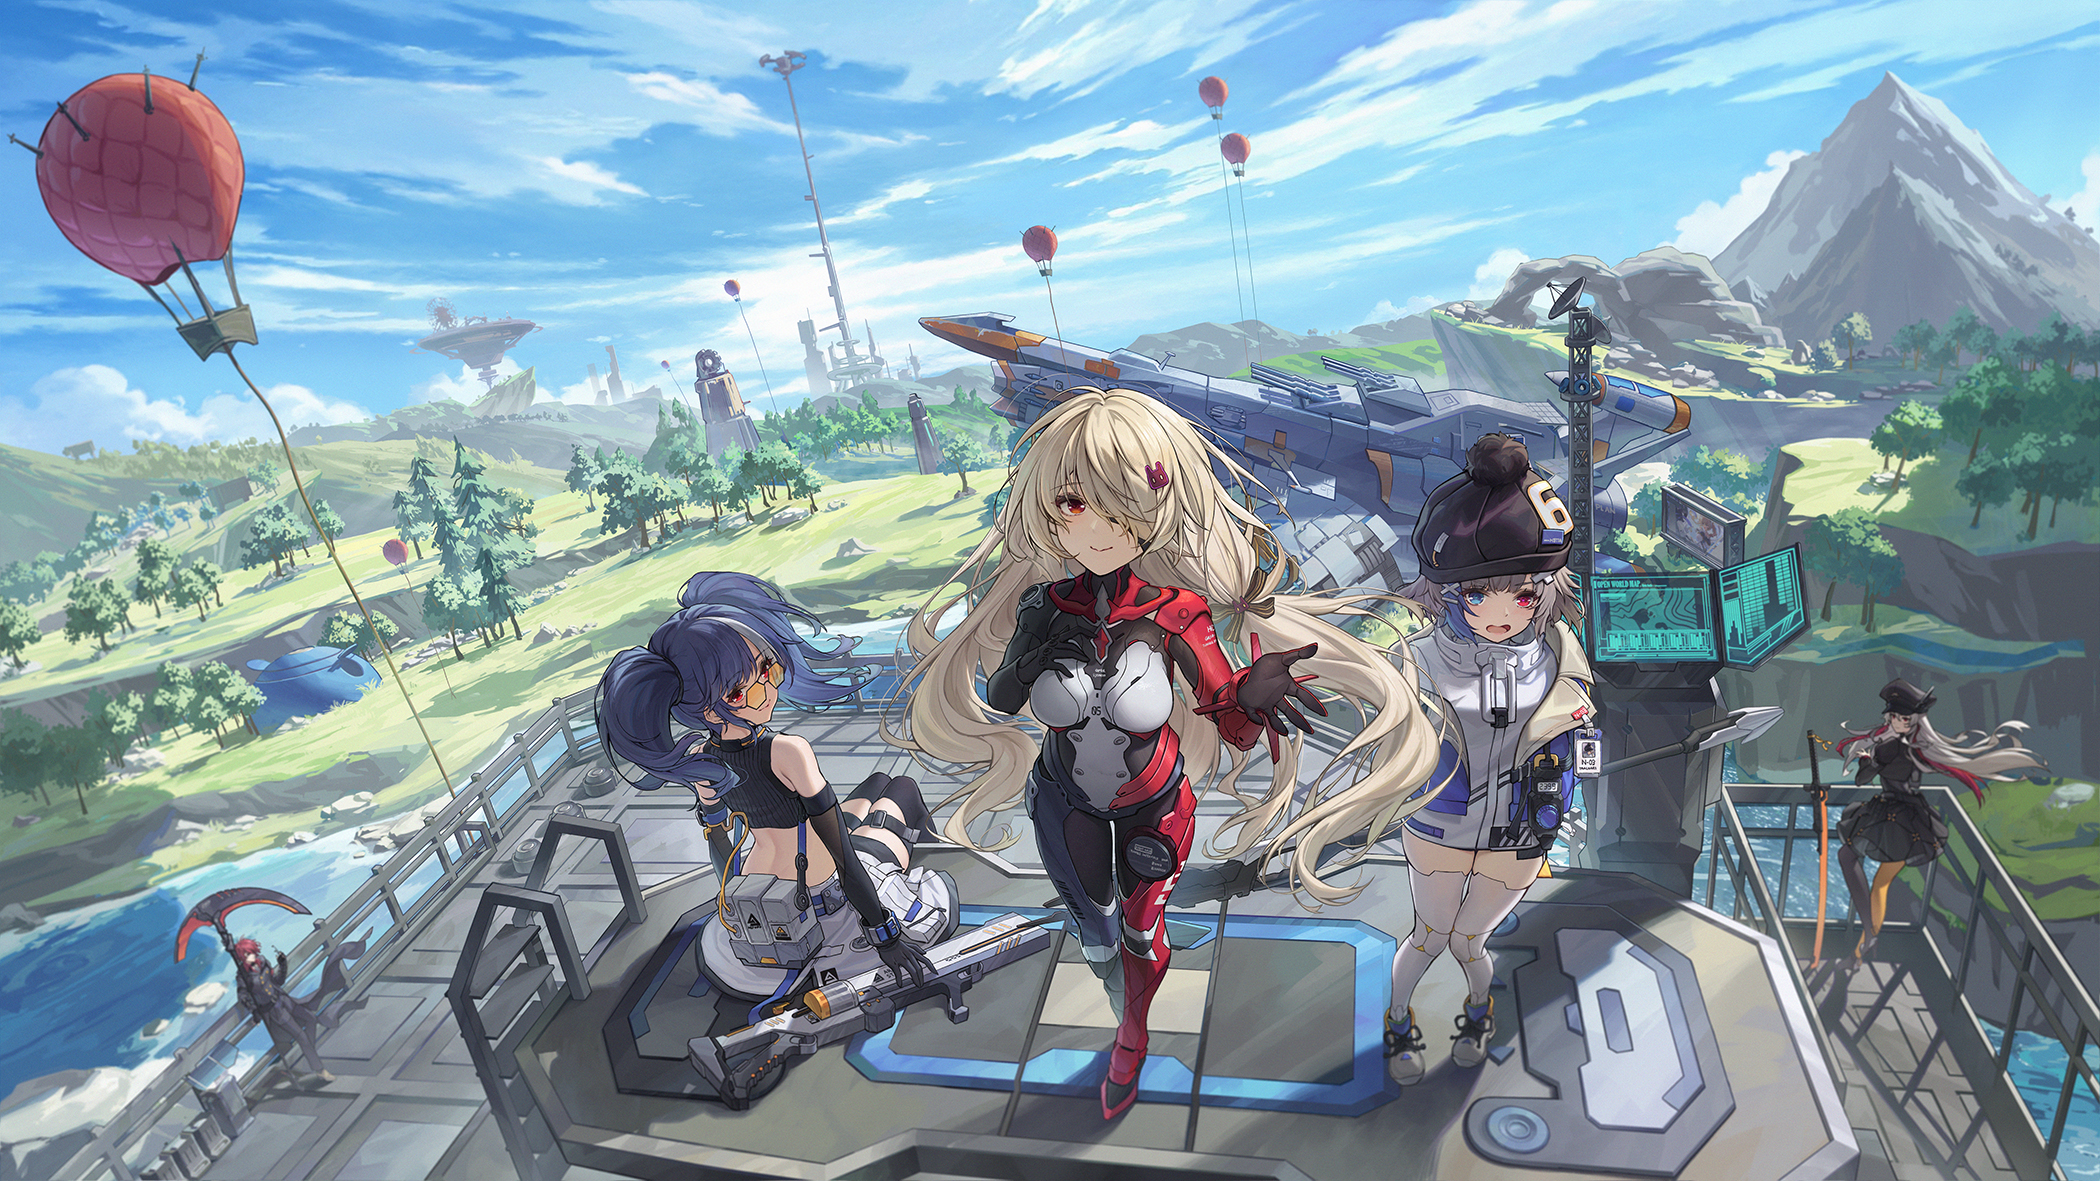 Anime Anime Girls Sky Blonde Weapon Hair In Face Red Eyes Long Hair Landscape 2100x1181